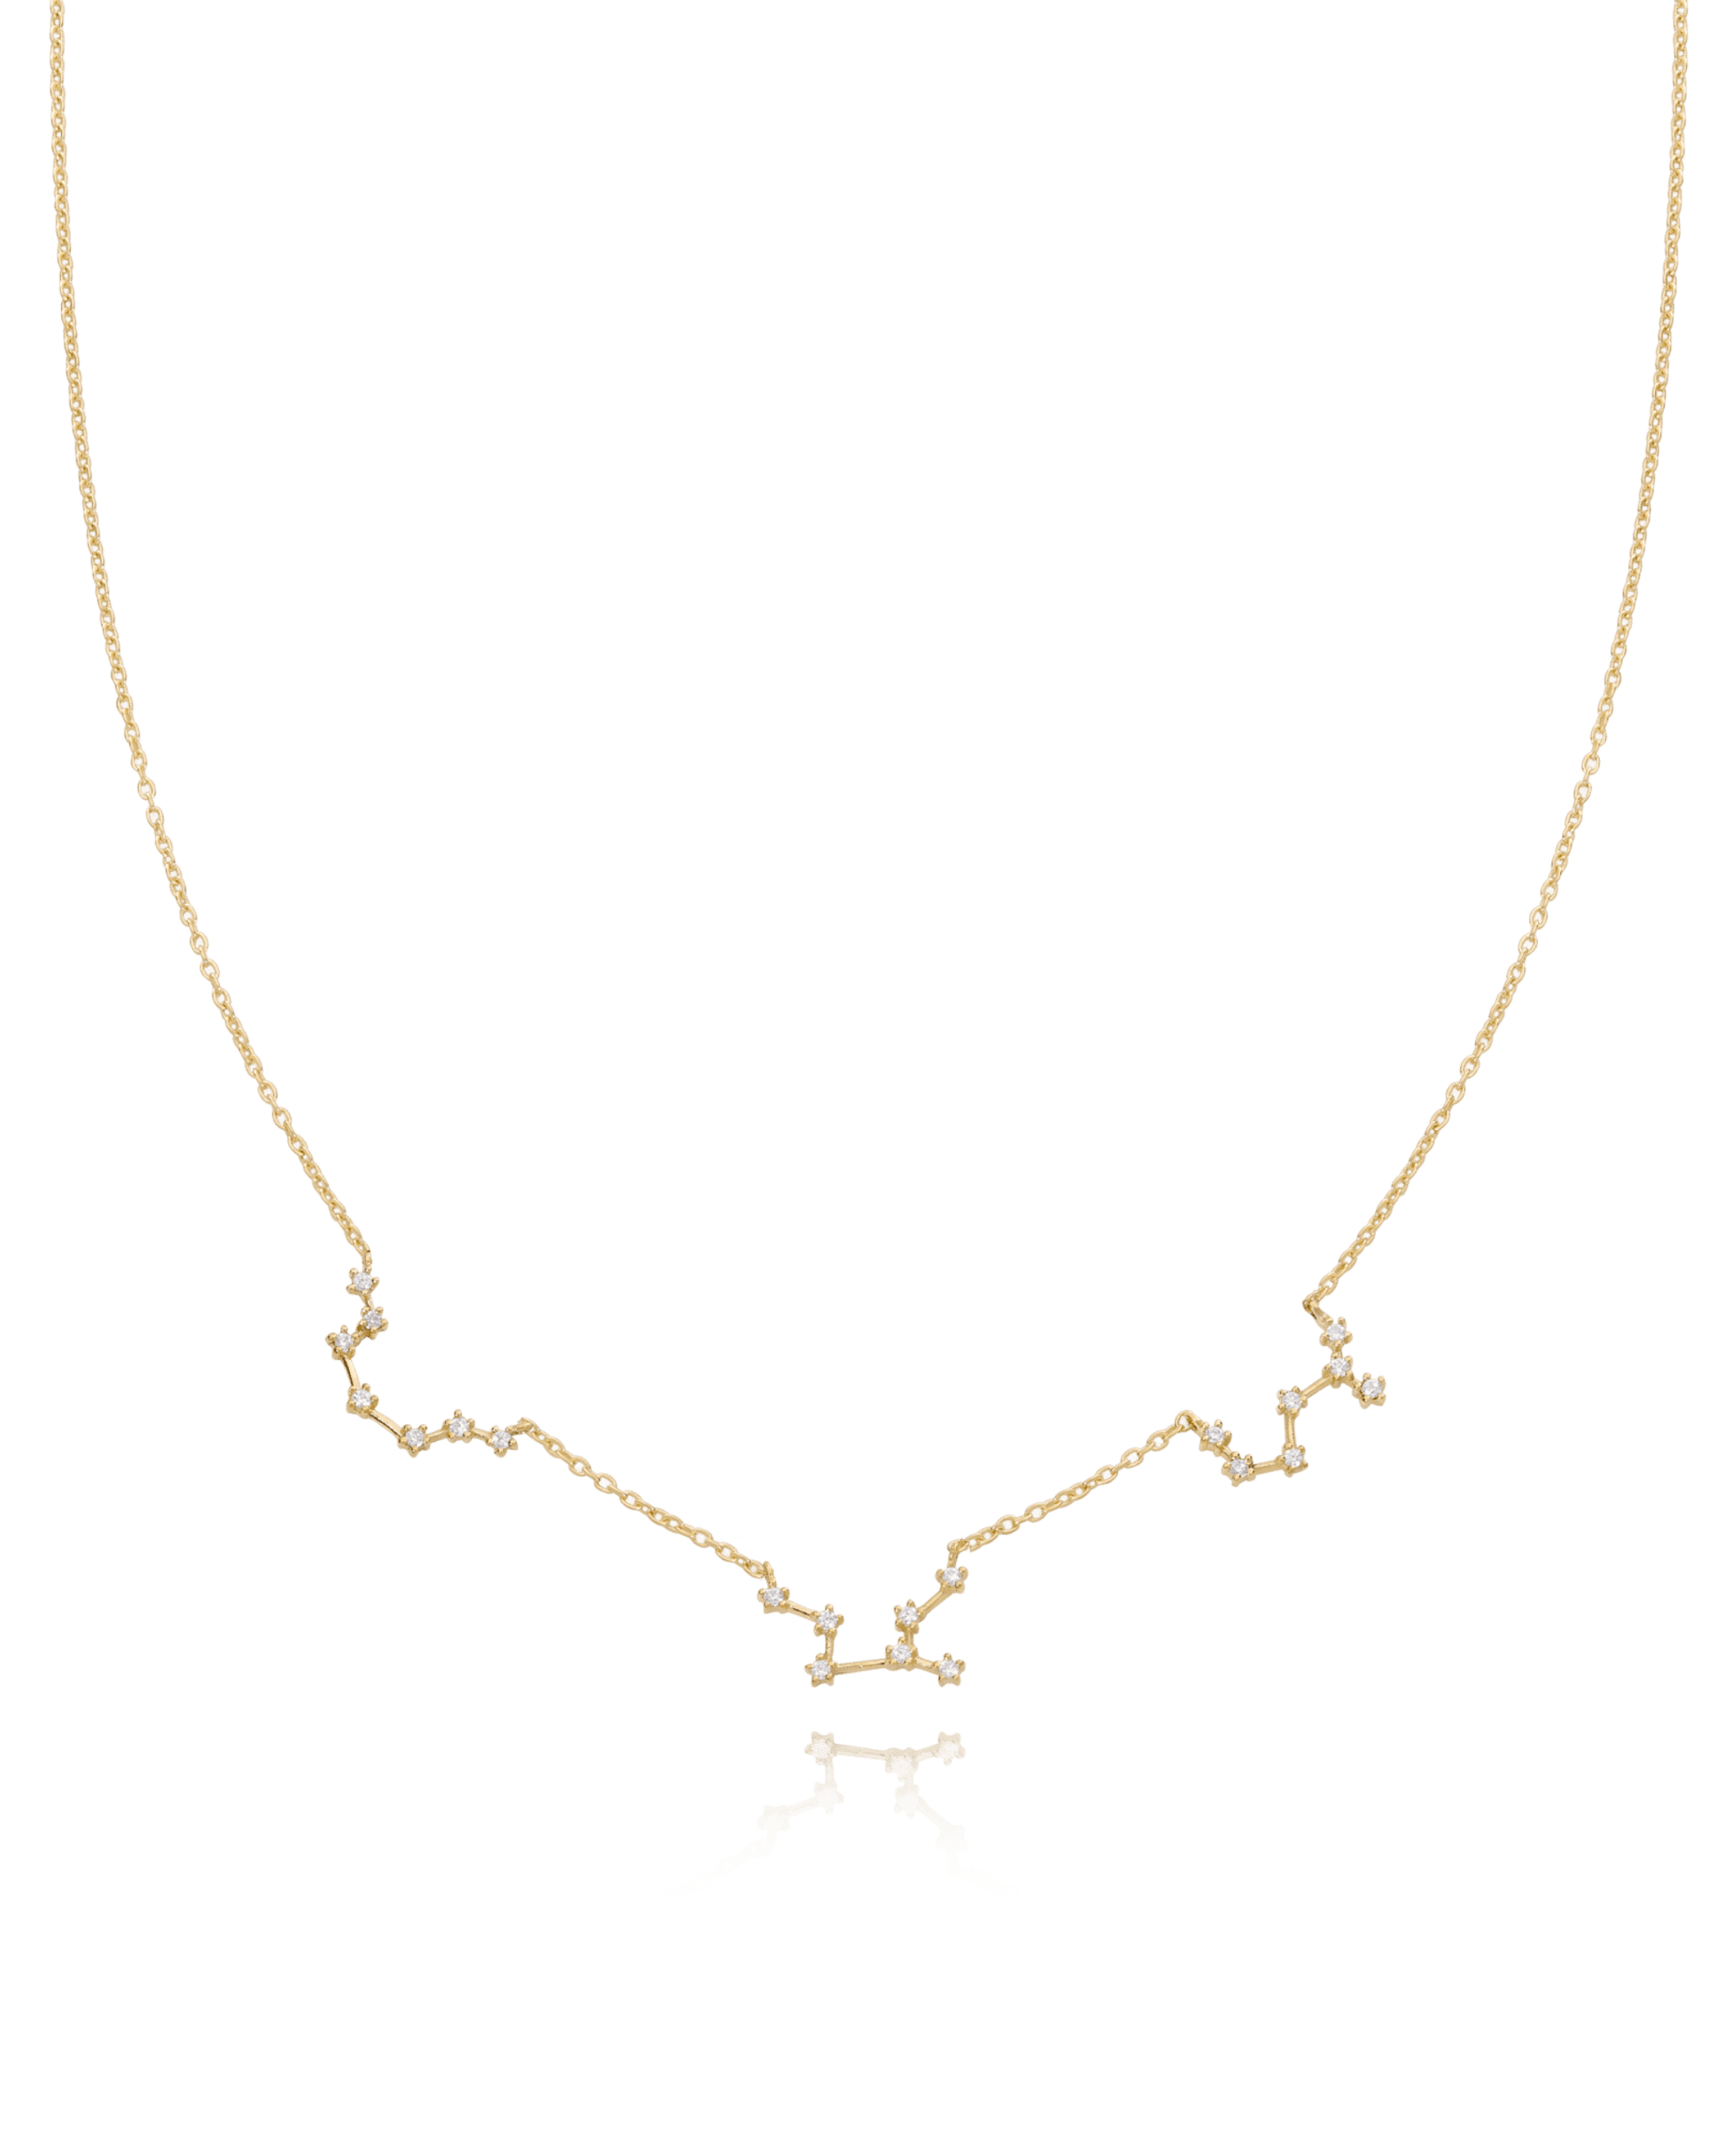 Sets of Constellation Necklaces - 925 Sterling Silver Necklaces magal-dev 1 Constellation 